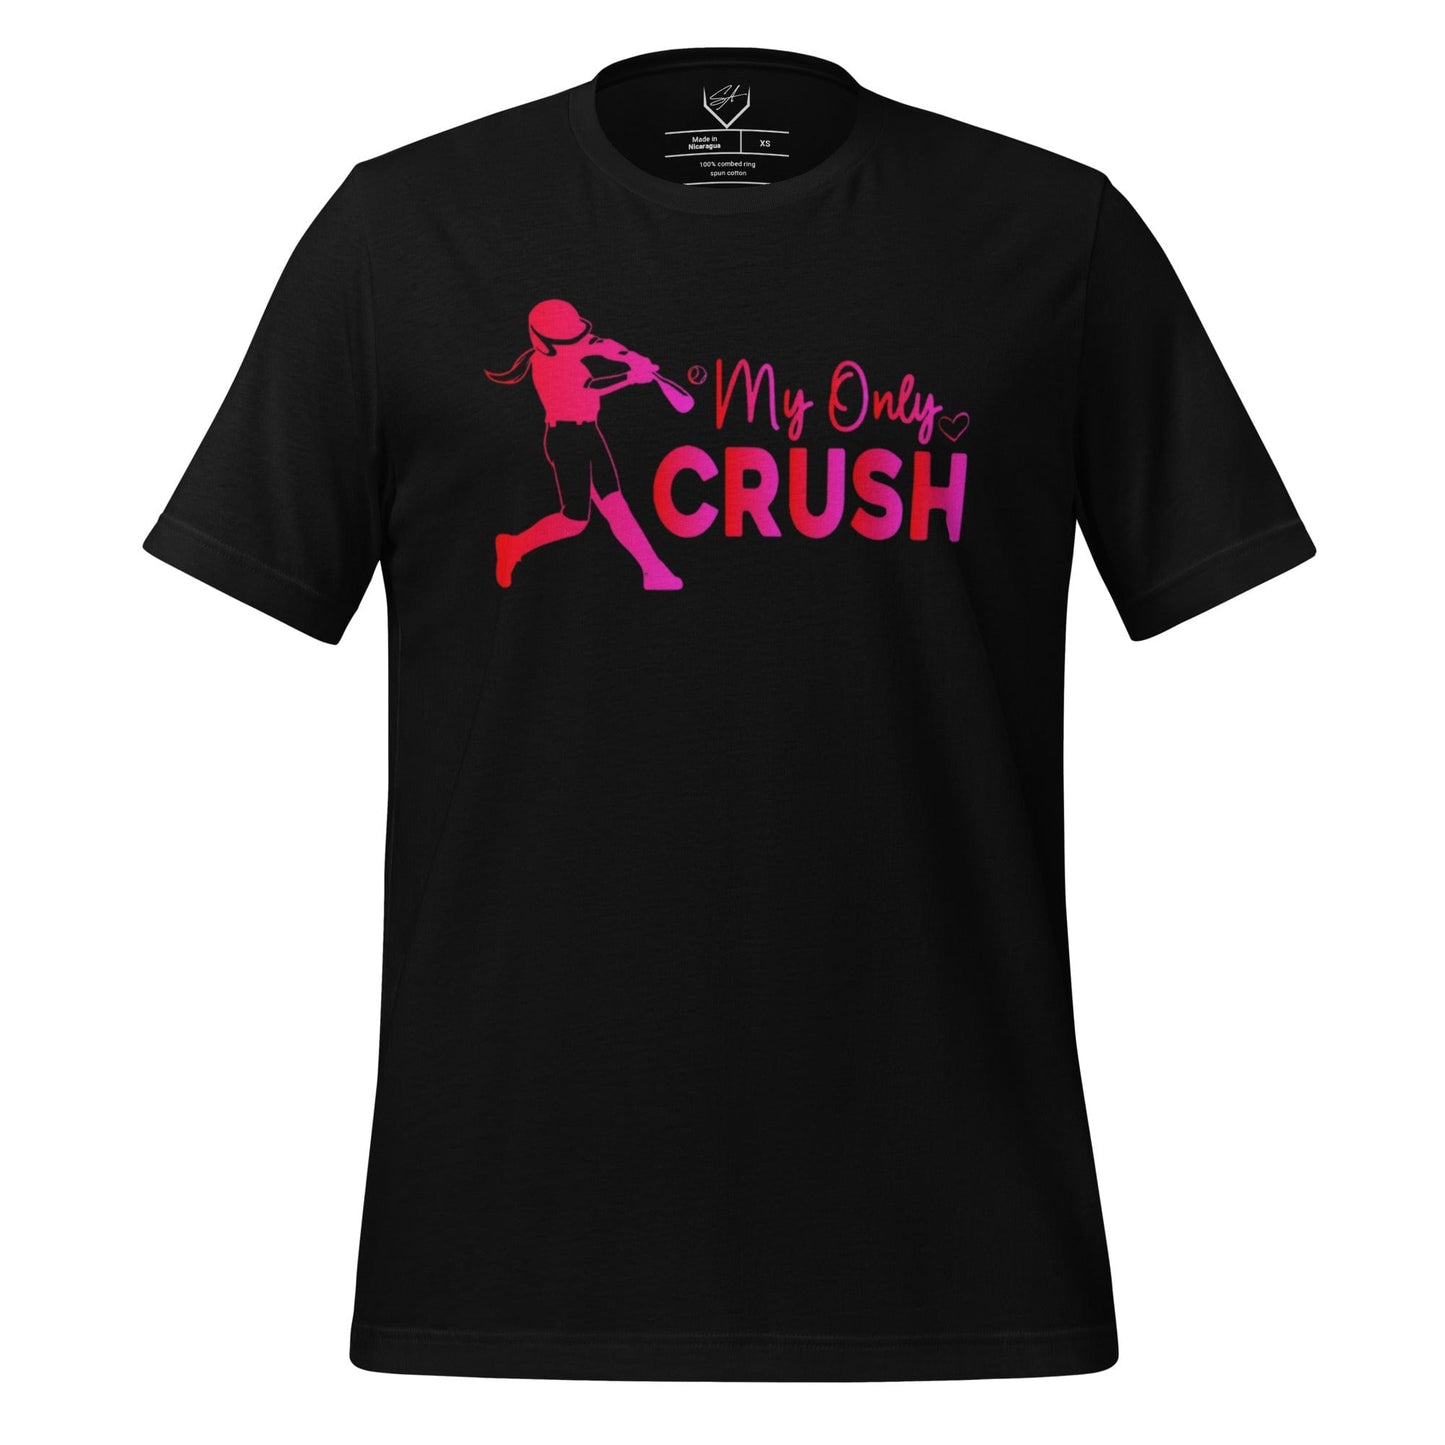 My Only Crush - Adult Tee